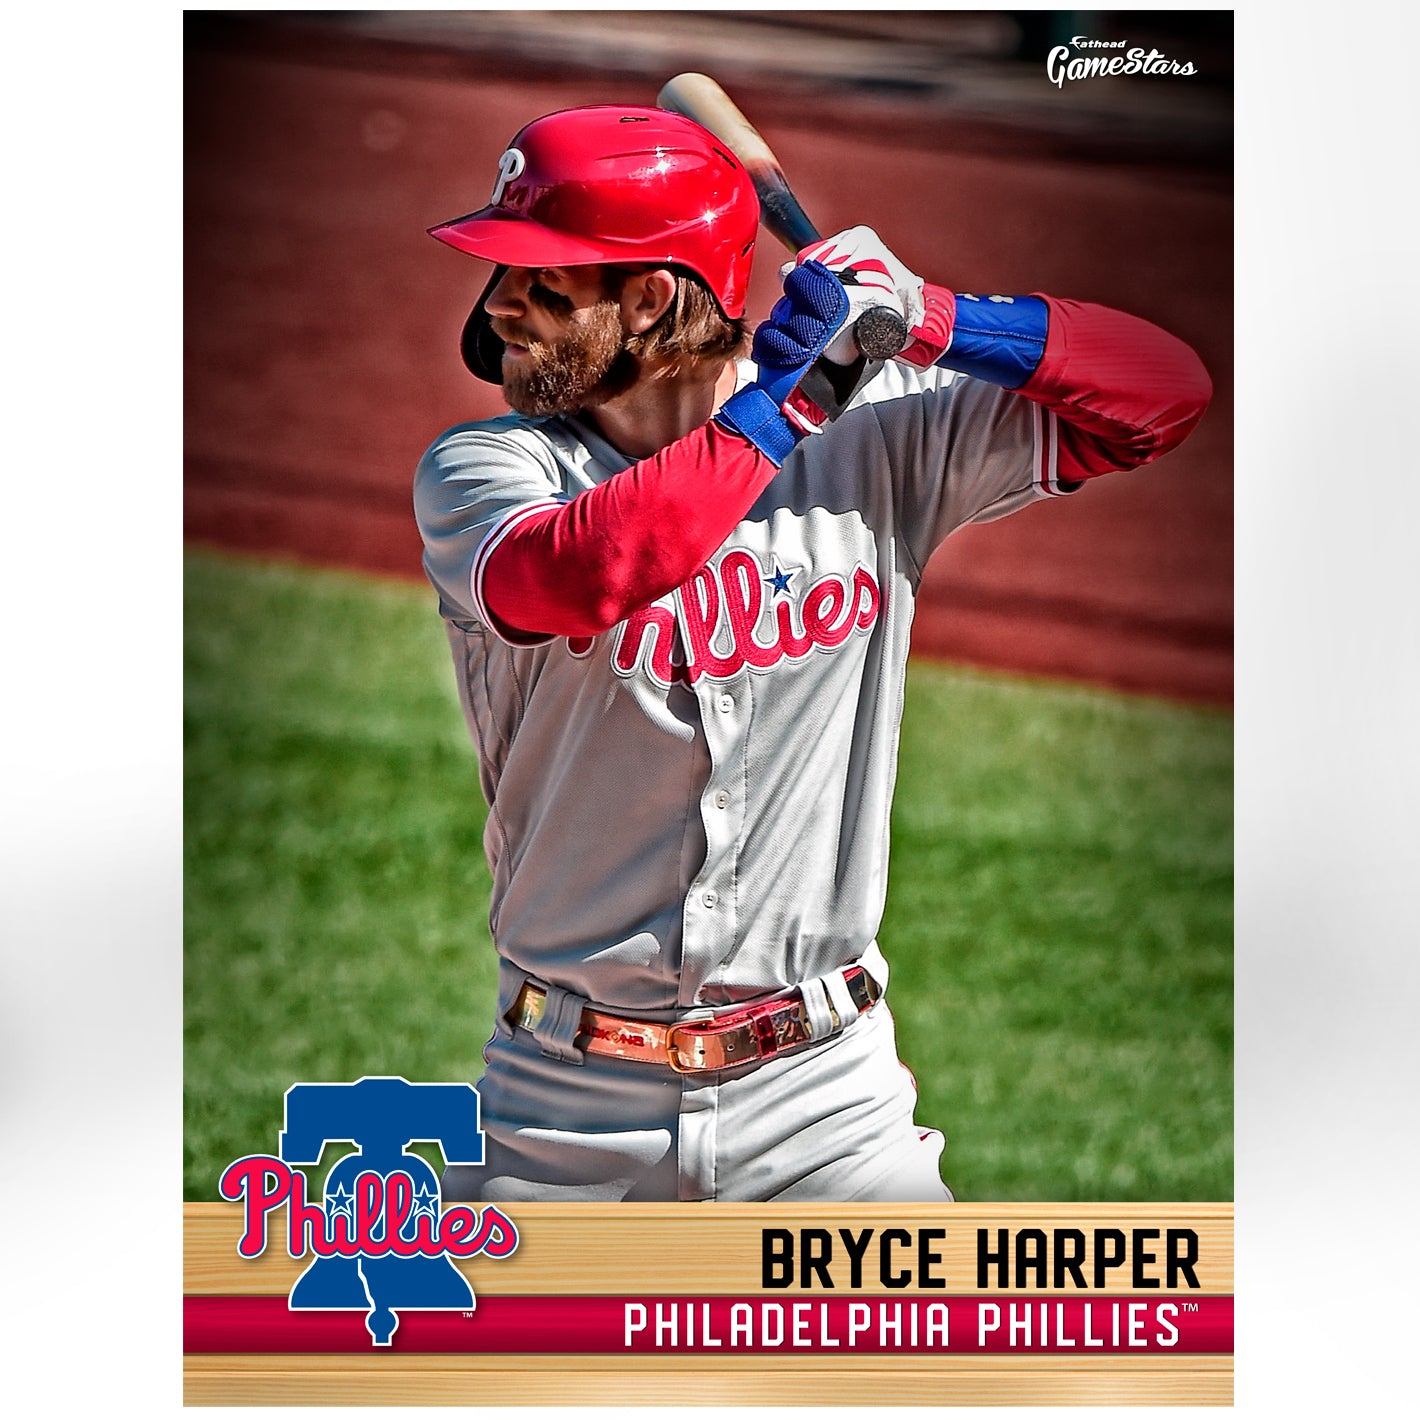 Philadelphia Phillies: Bryce Harper 2021 GameStar - MLB Removable Wall Adhesive Wall Decal Large